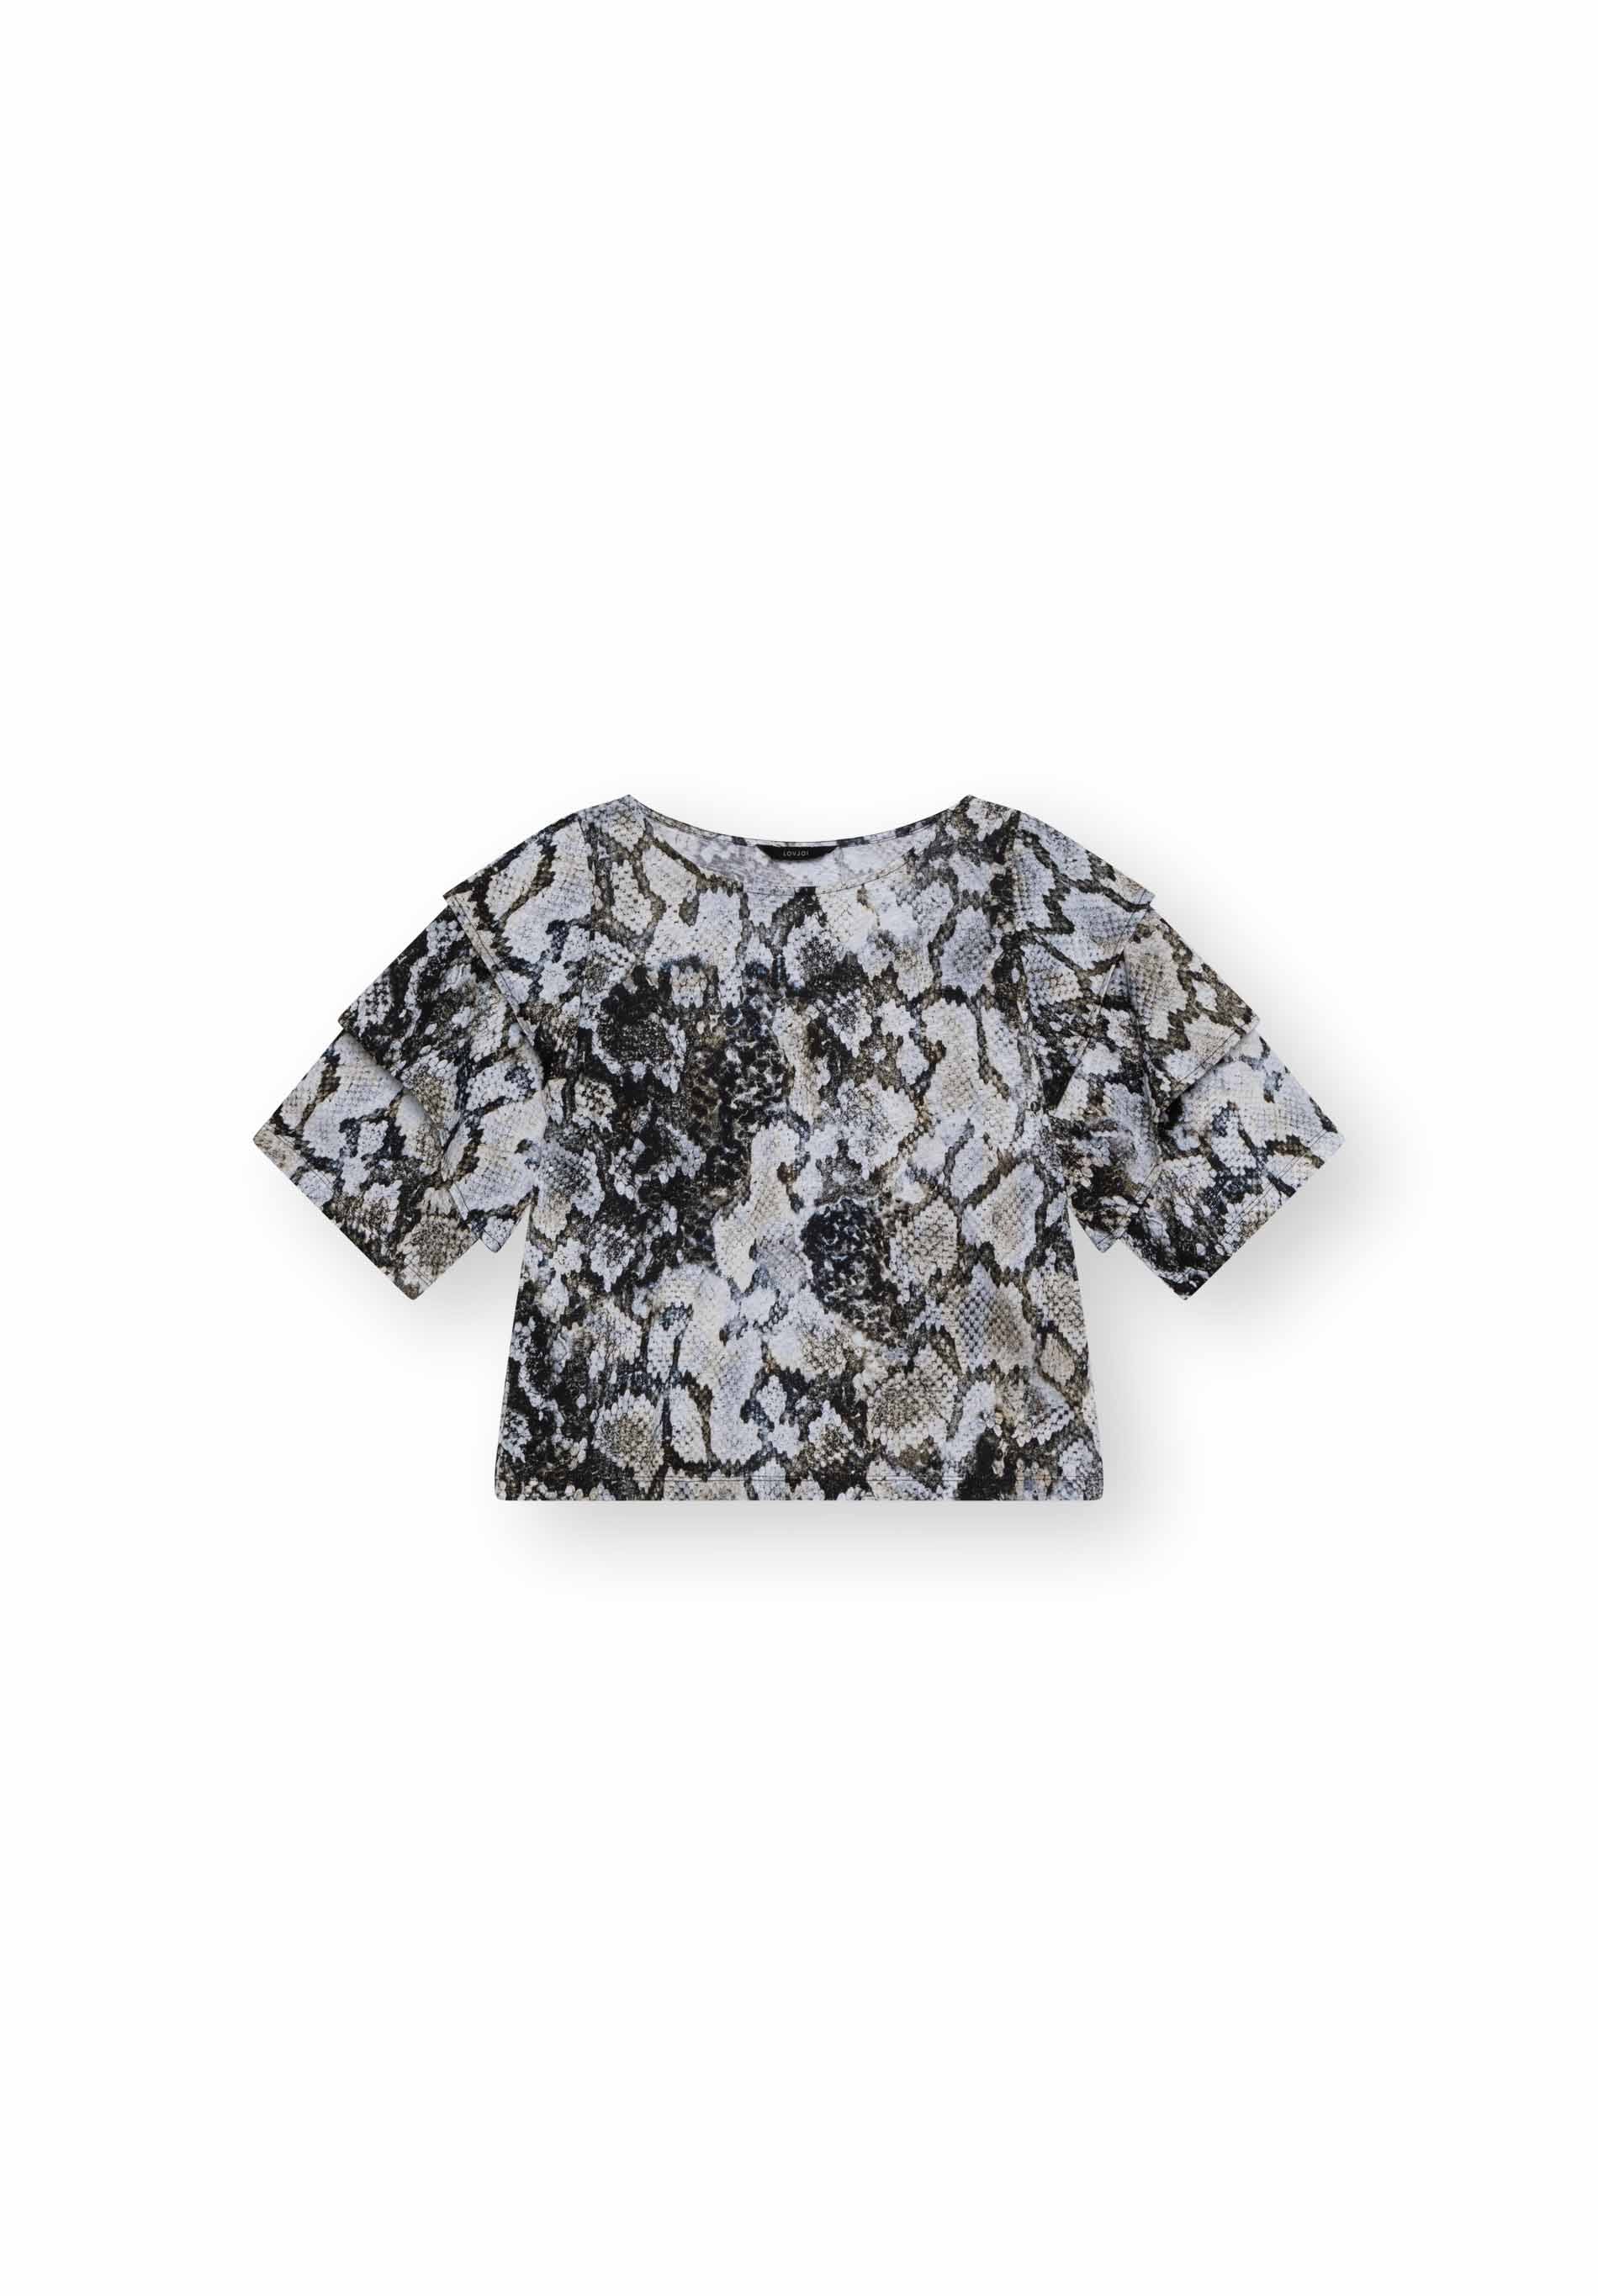 T-shirt LILLIT in animal print by LOVJOI made of organic cotton 